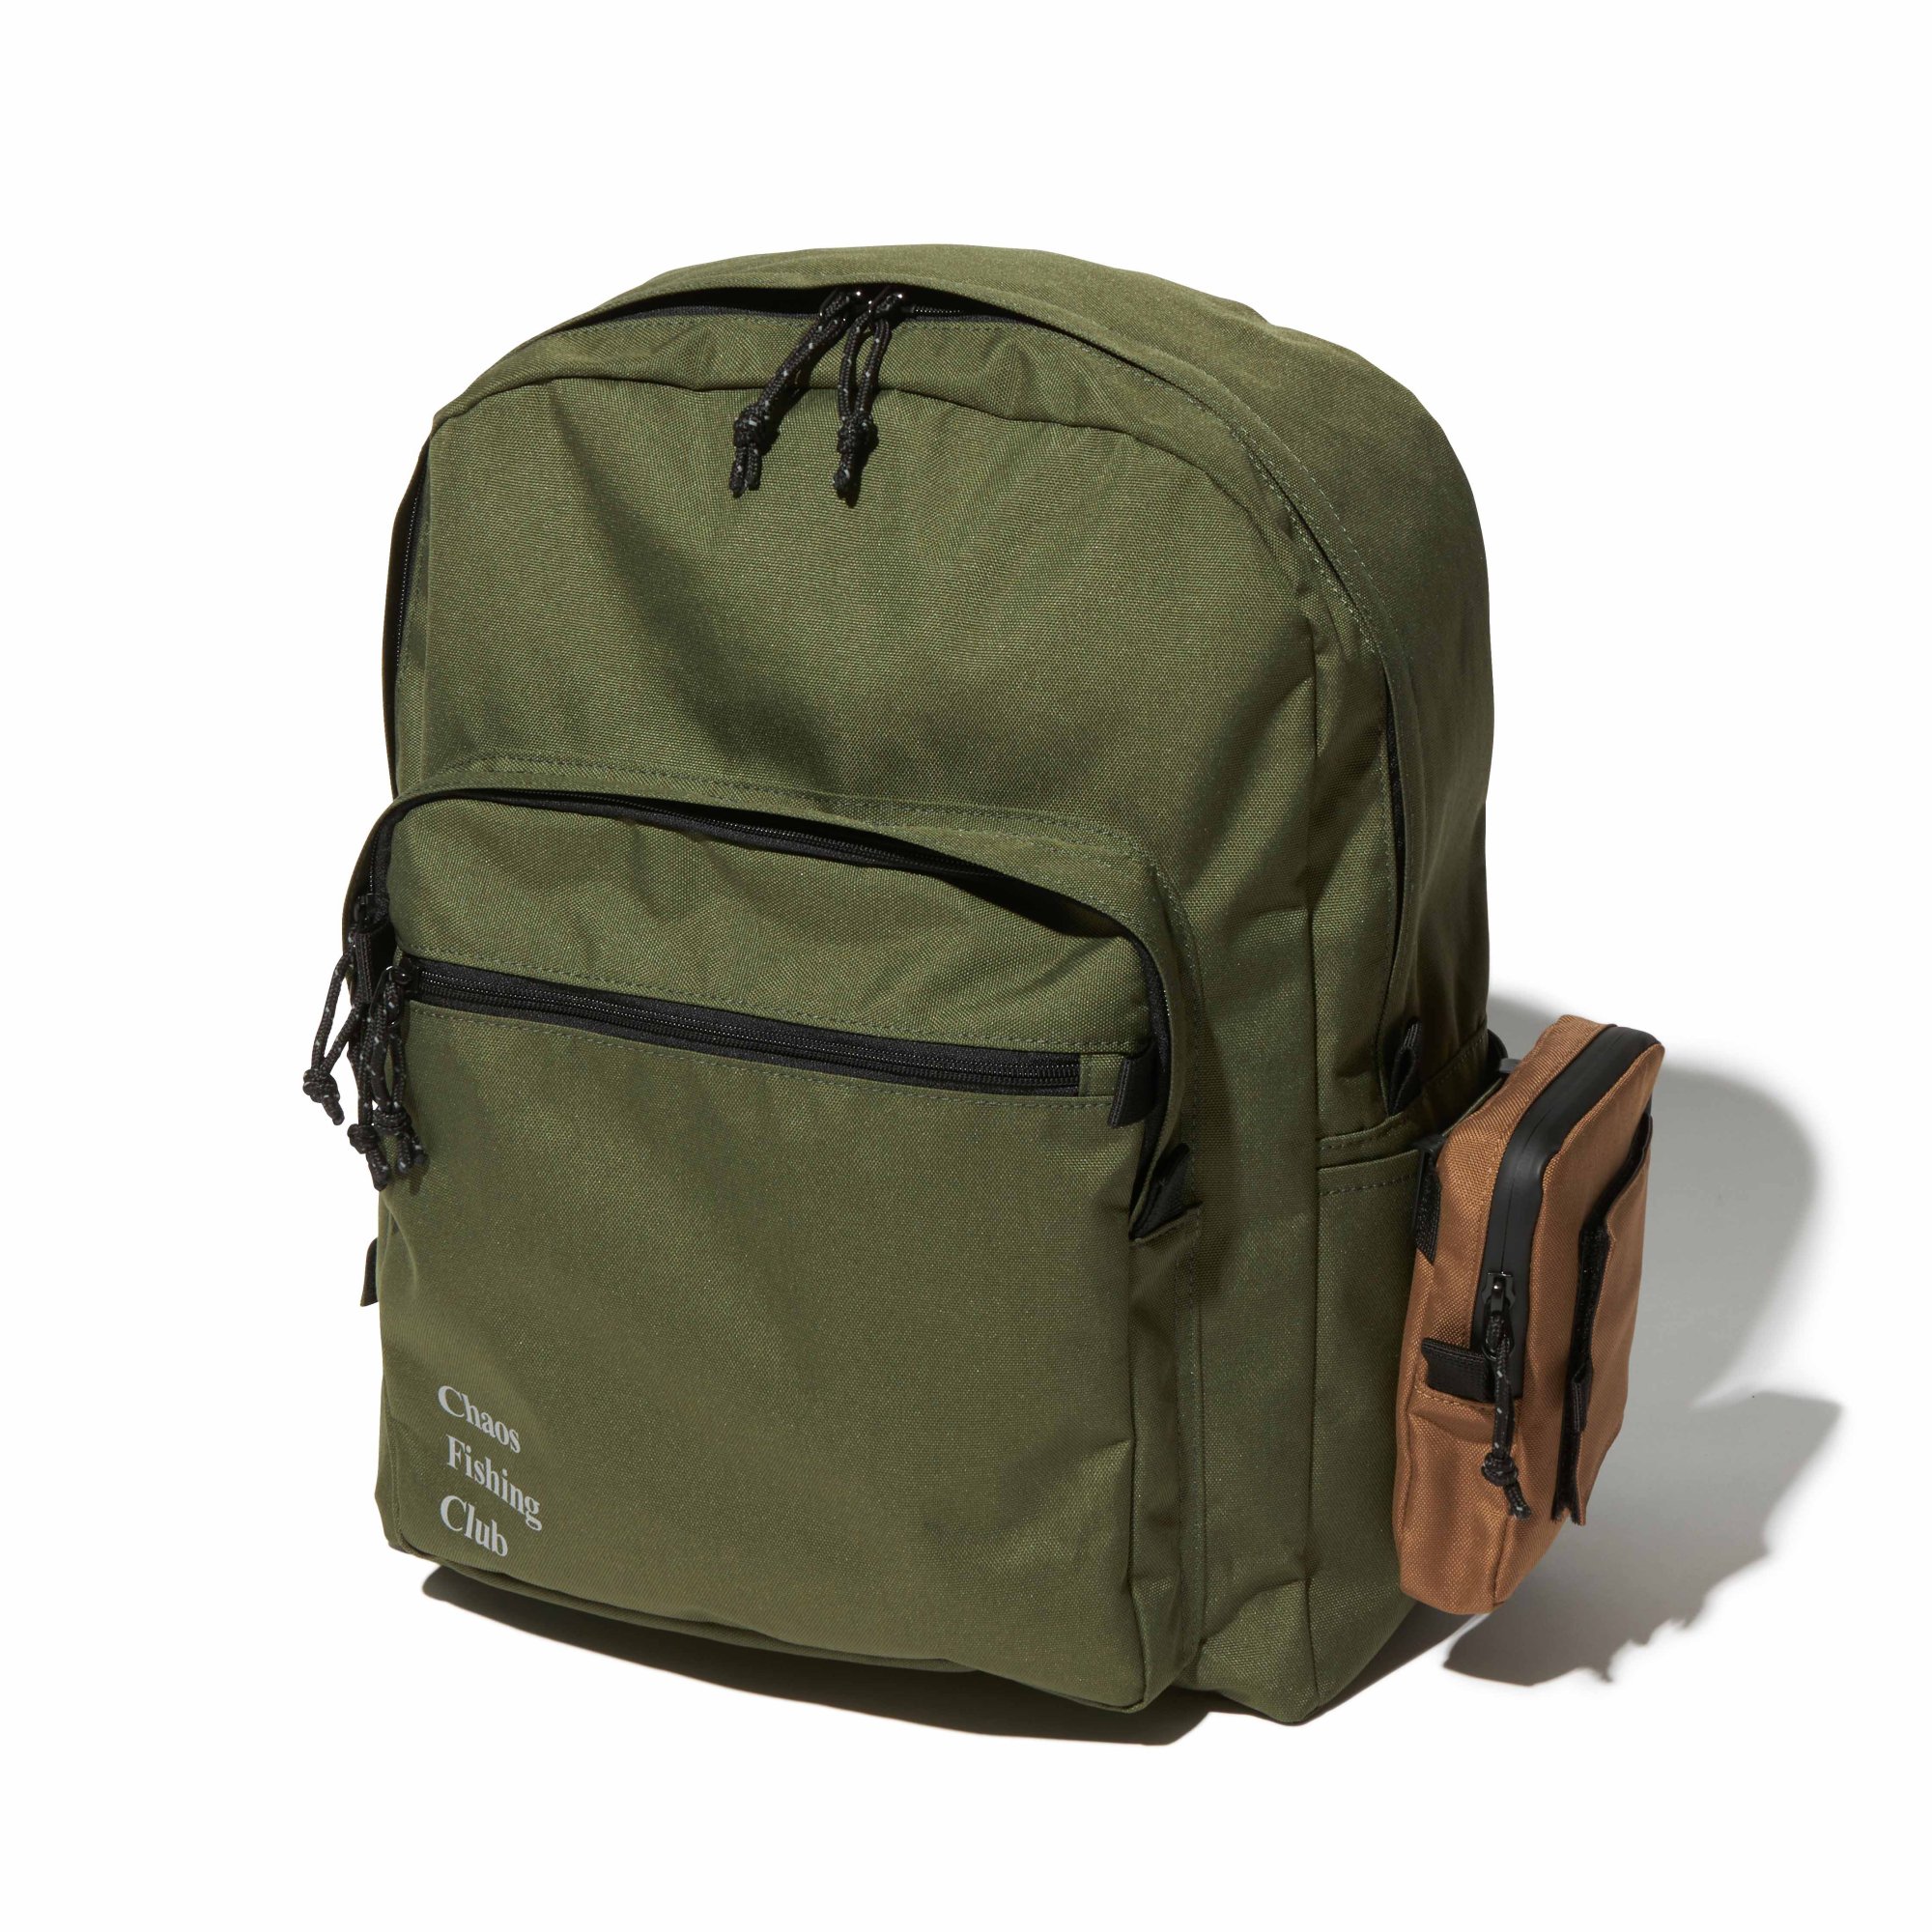 Chaos Fishing Club<br>WANOPE BACKPACK<br>